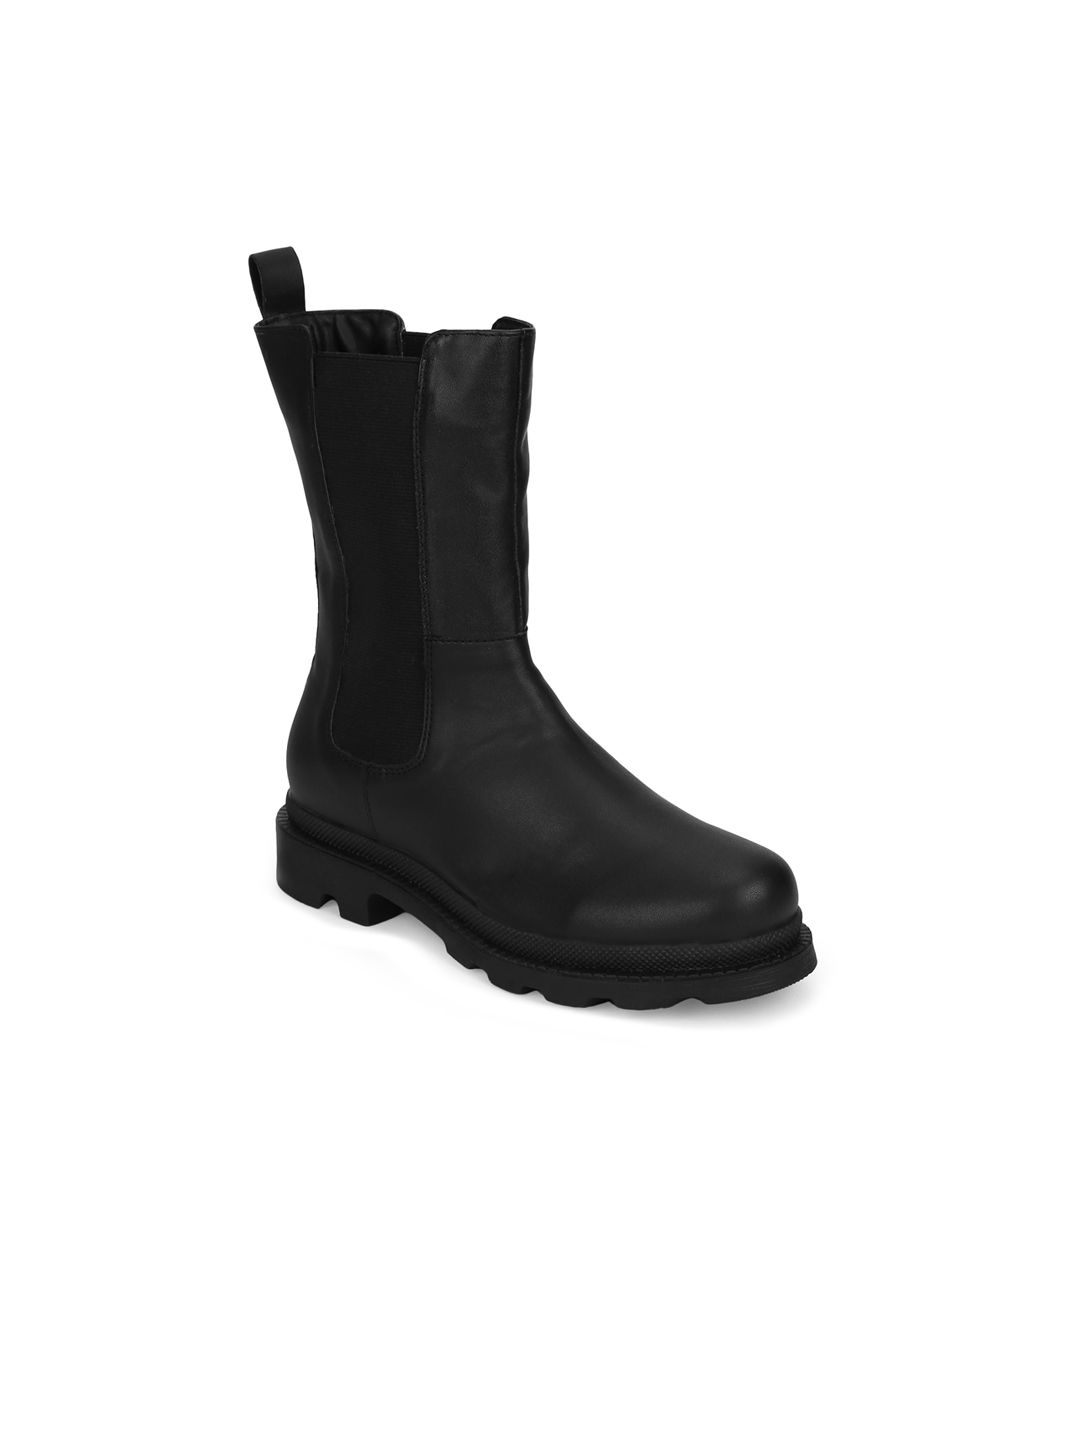 Truffle Collection Black PU Heeled Boots Price in India